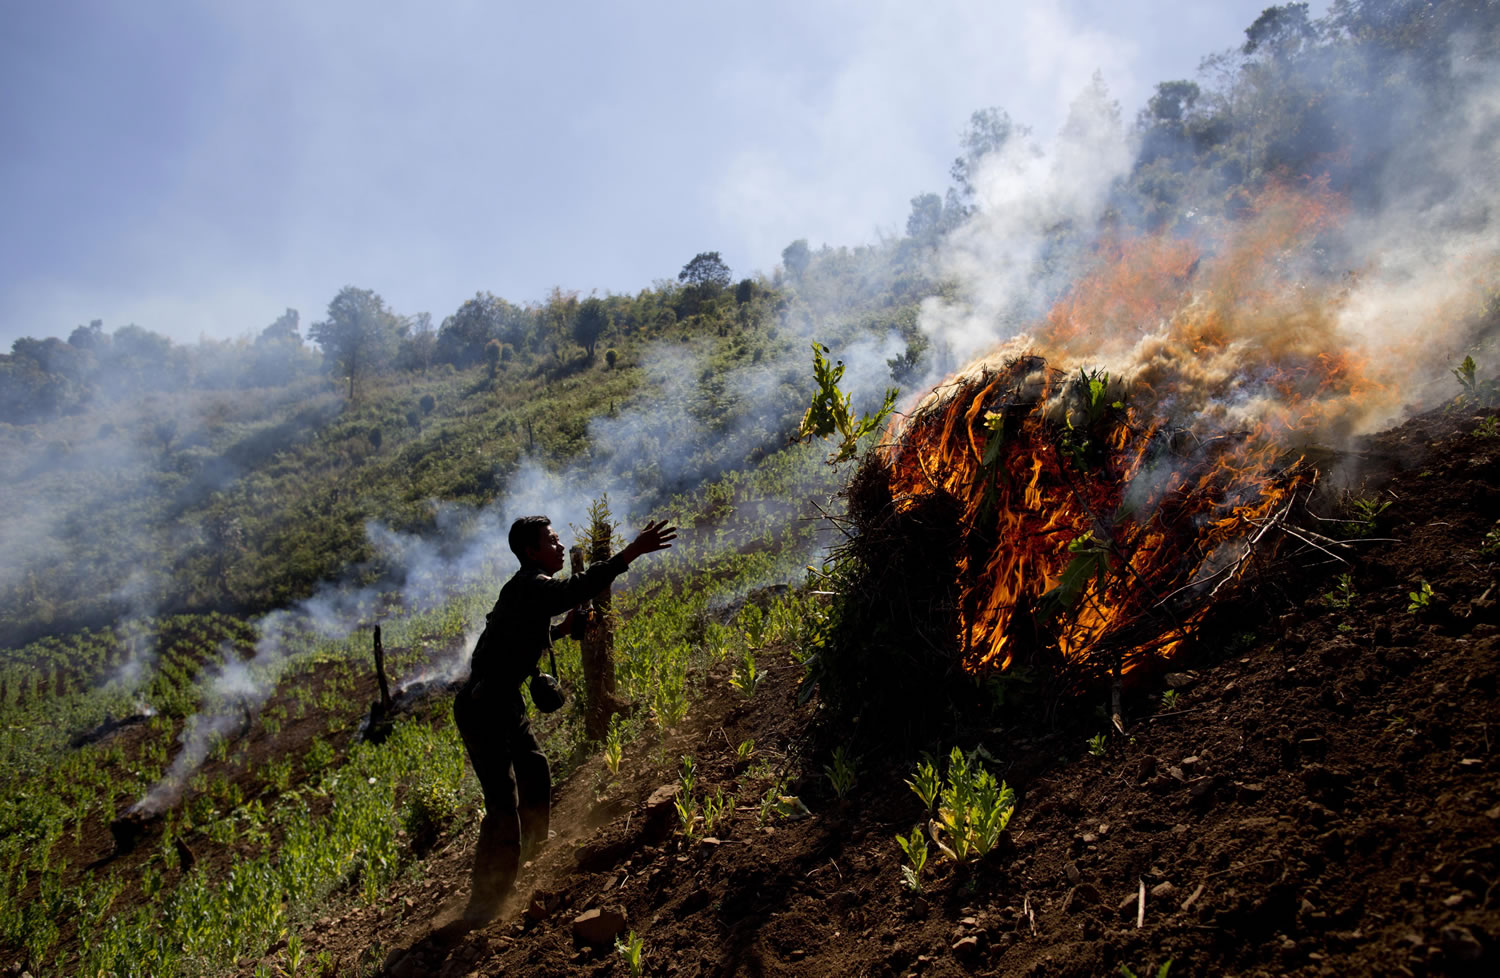 A Taang rebel burns poppy plants in January near Loi Chyaram village, Myanmar, a Taang self-governing area in northern Shan state.